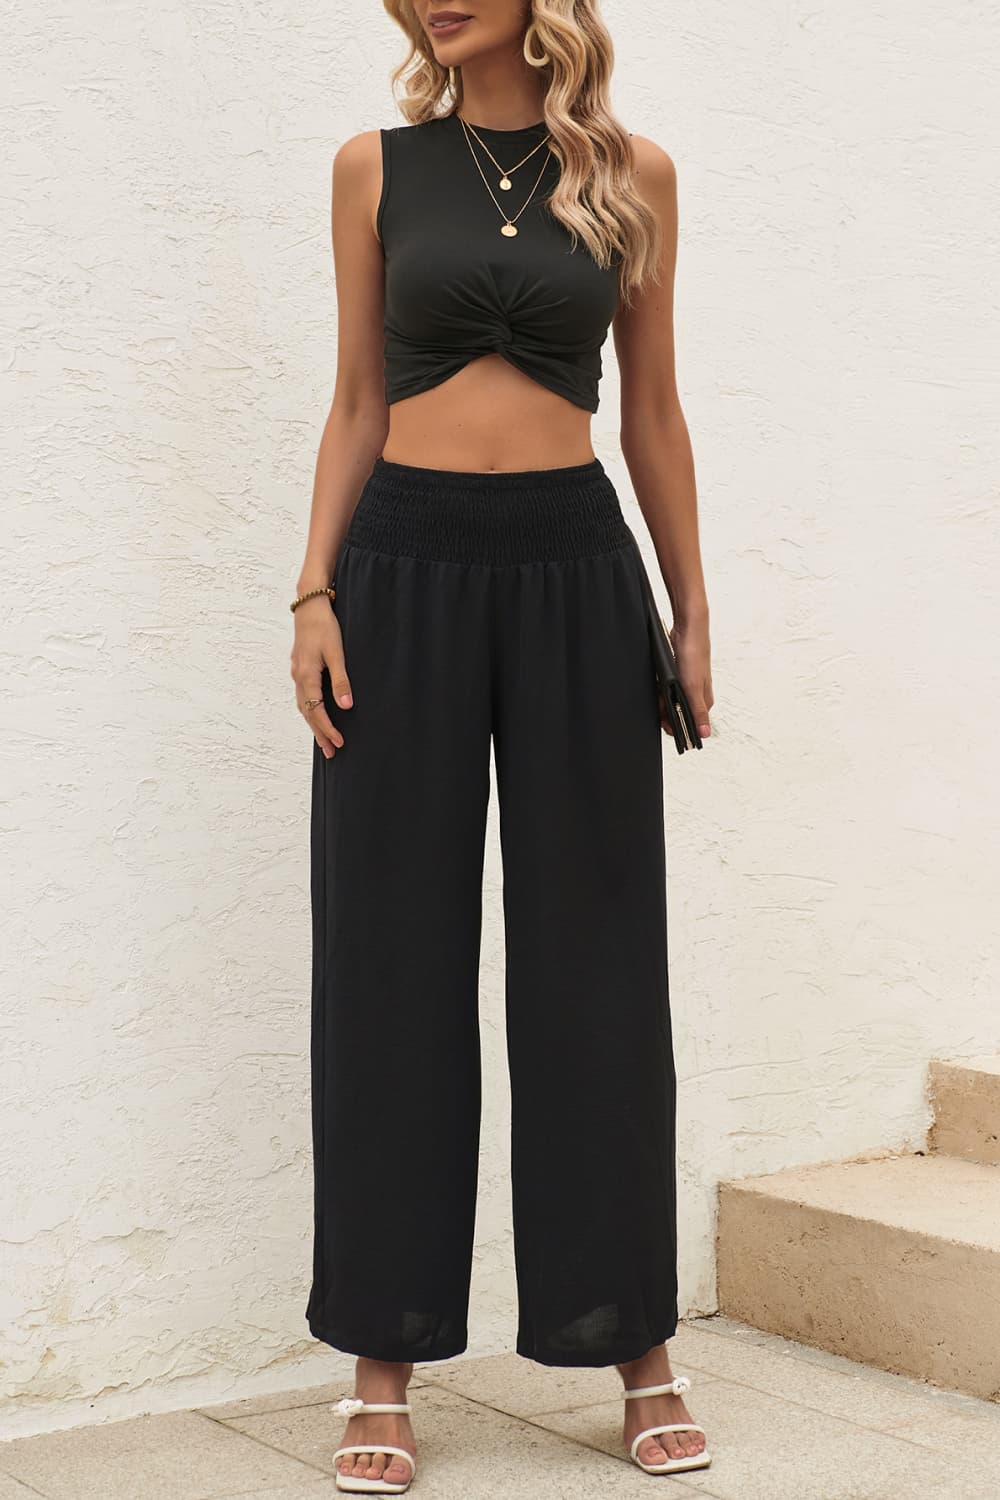 Twist Front Cropped Tank and Pants Set Bottom wear